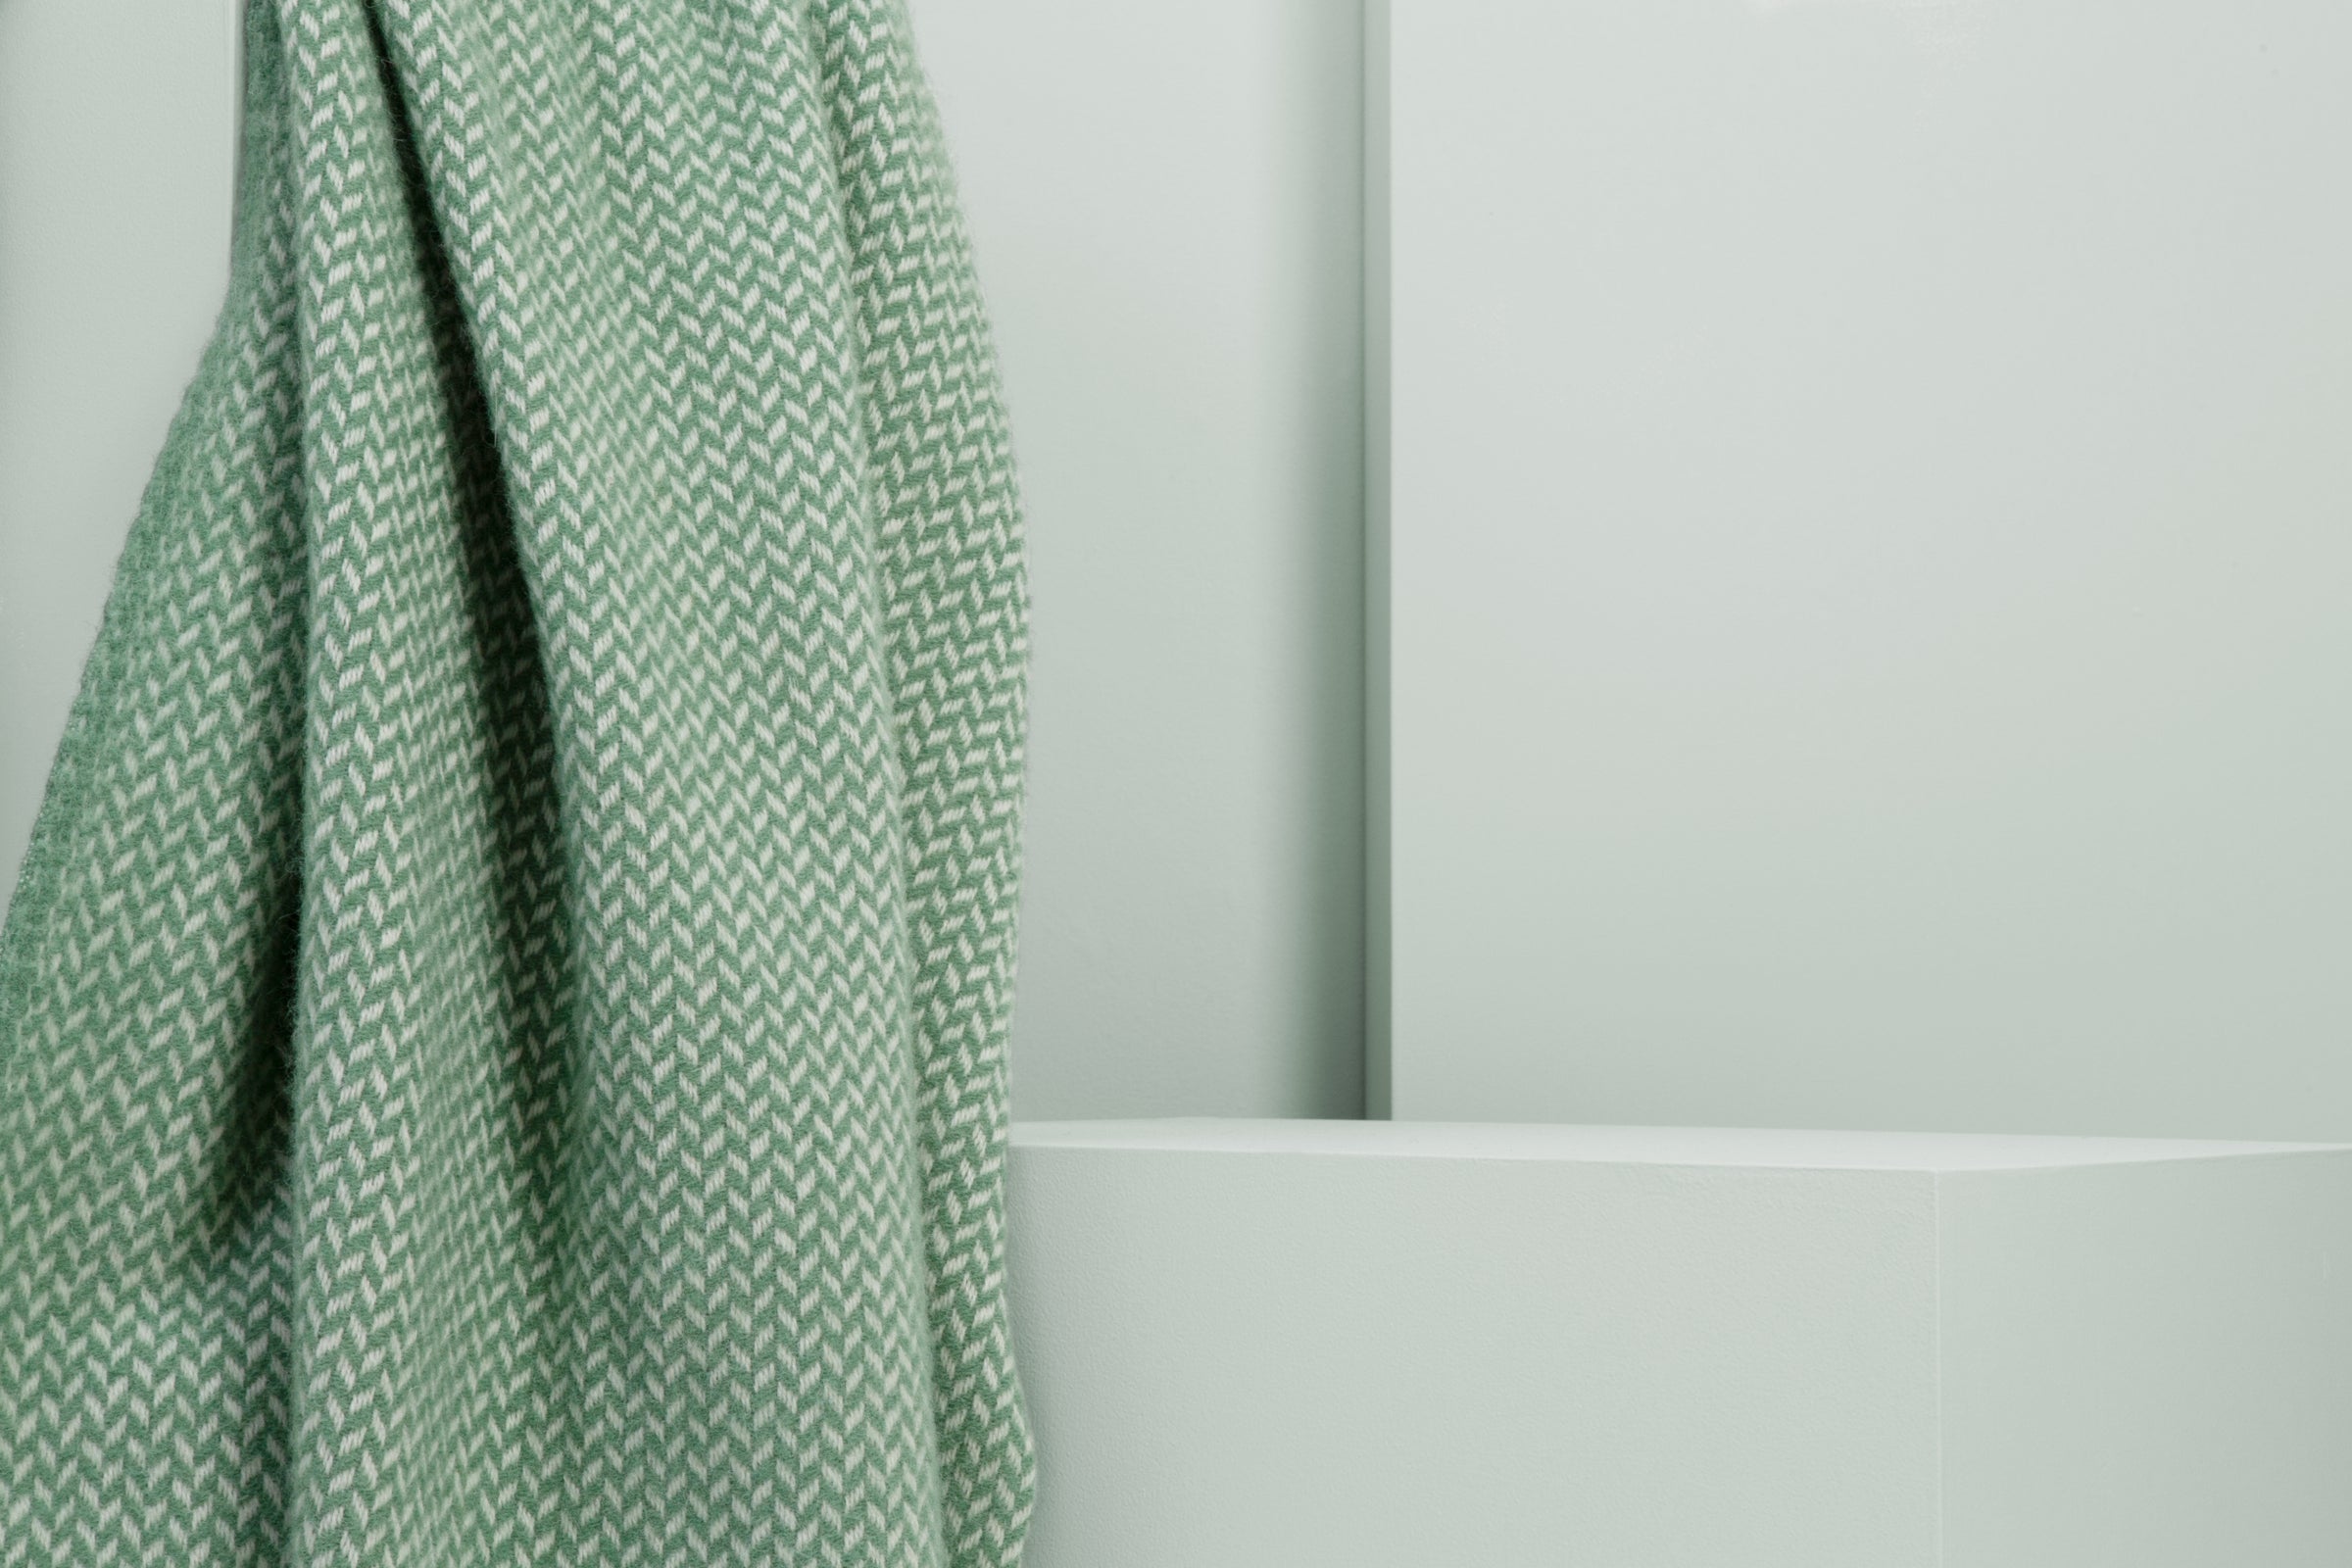 wool blanket green. green blanket. Super soft blanket. wool blanket made in the uk. british blankets made from real wool. 